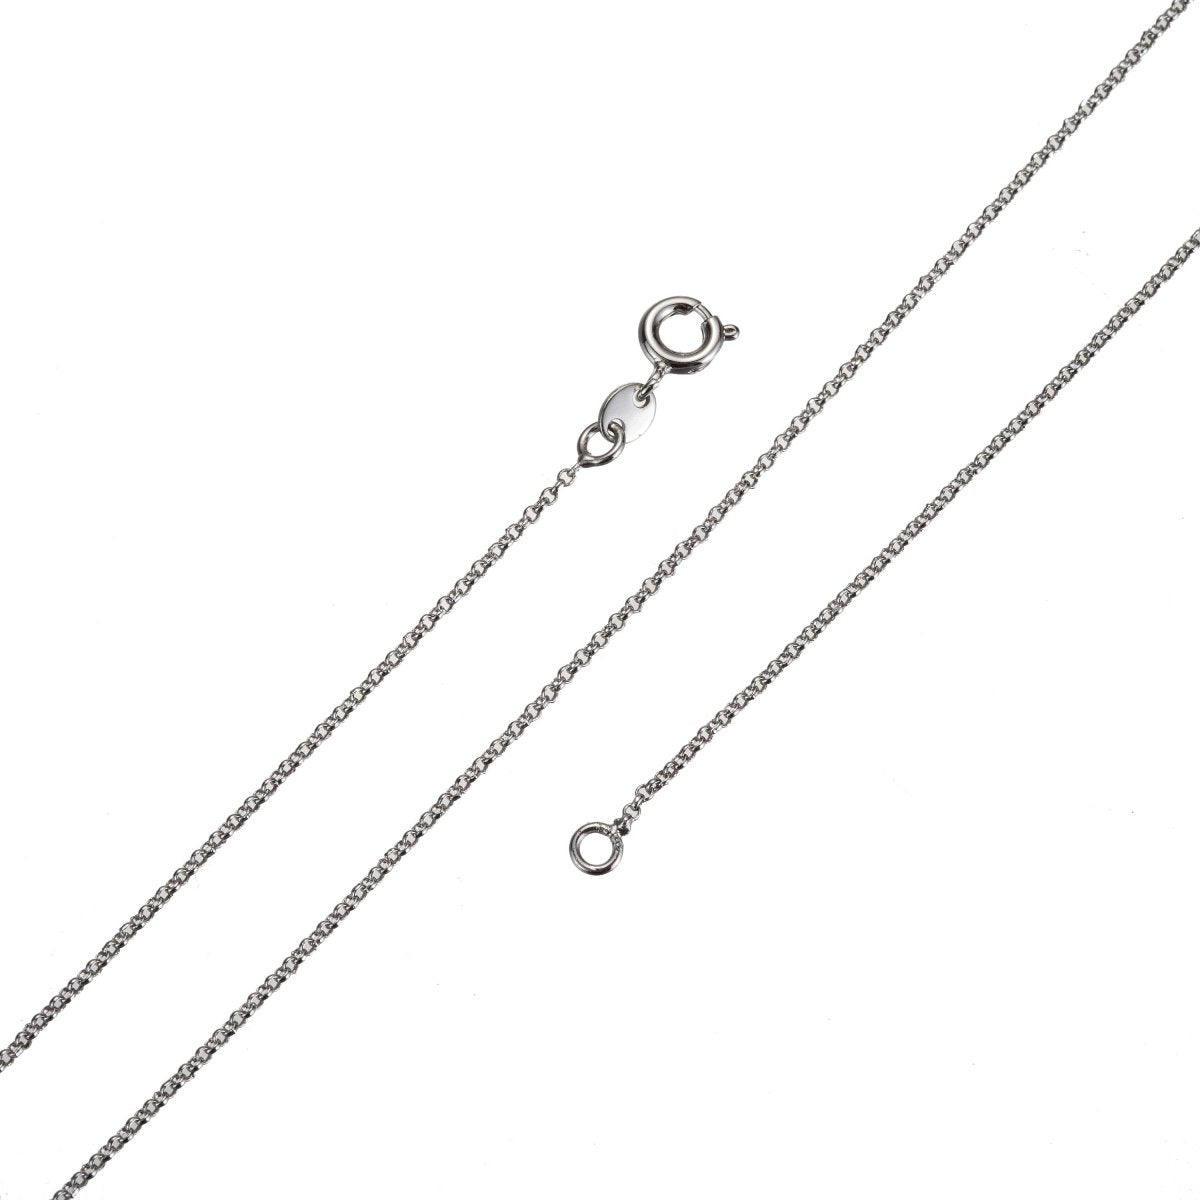 Simple Silver Chain Necklace, Dainty Rolo Necklace 17.7 inch, 1mm Dainty everyday necklace for Men Woman Unisex Chain, White Gold Rolo w/ Spring Ring | CN-643 - DLUXCA